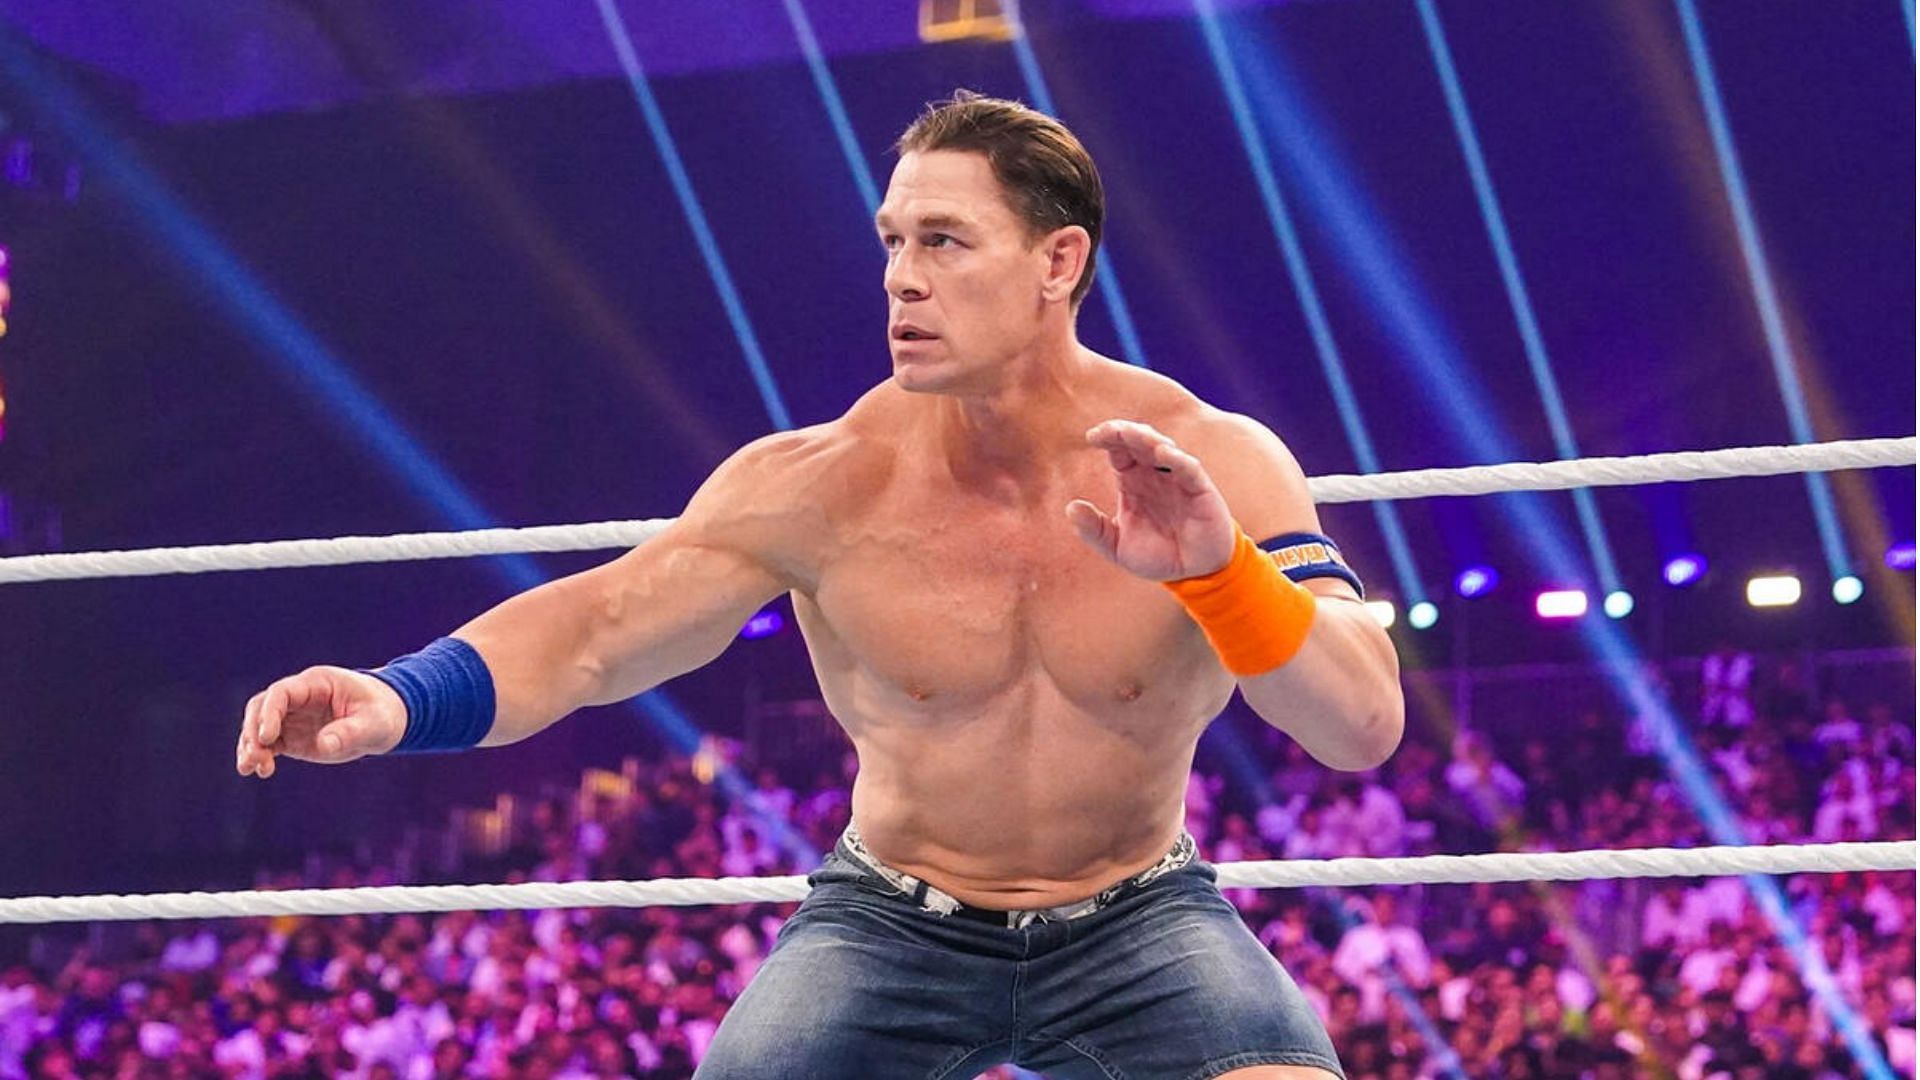 Will John Cena appear on this year